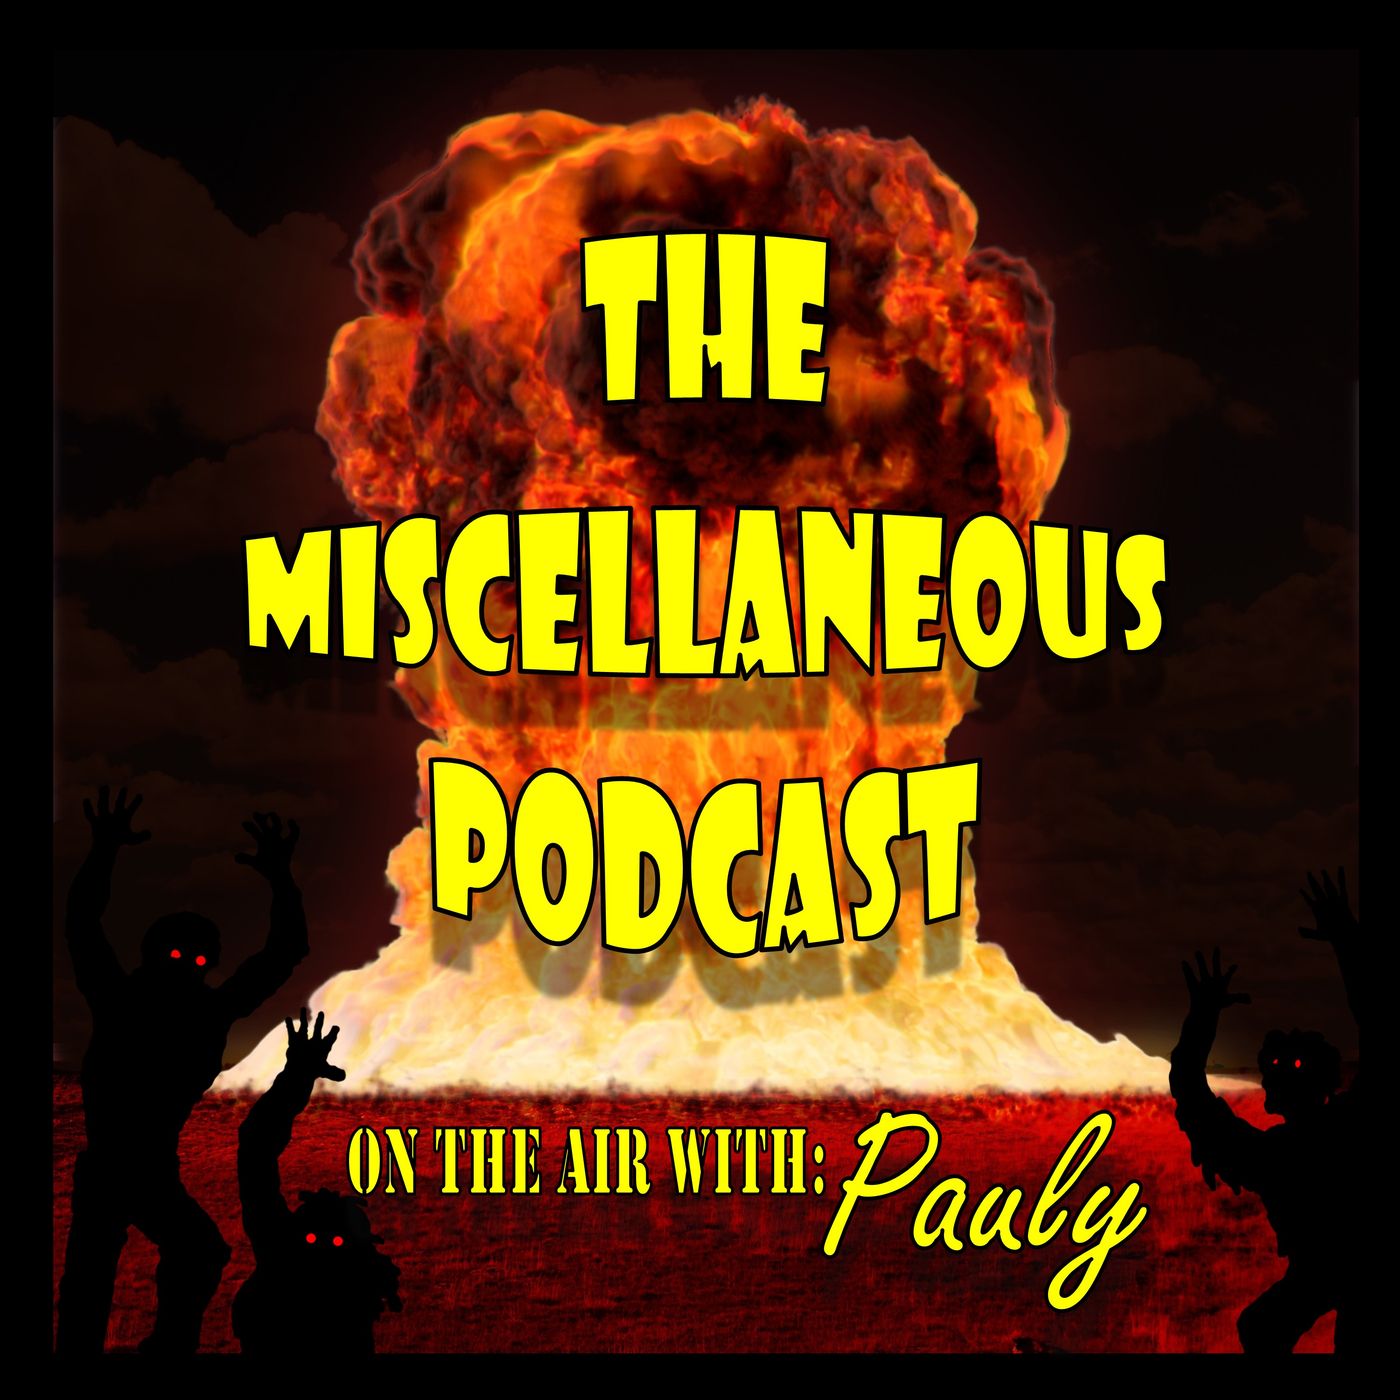 The Miscellaneous Podcast